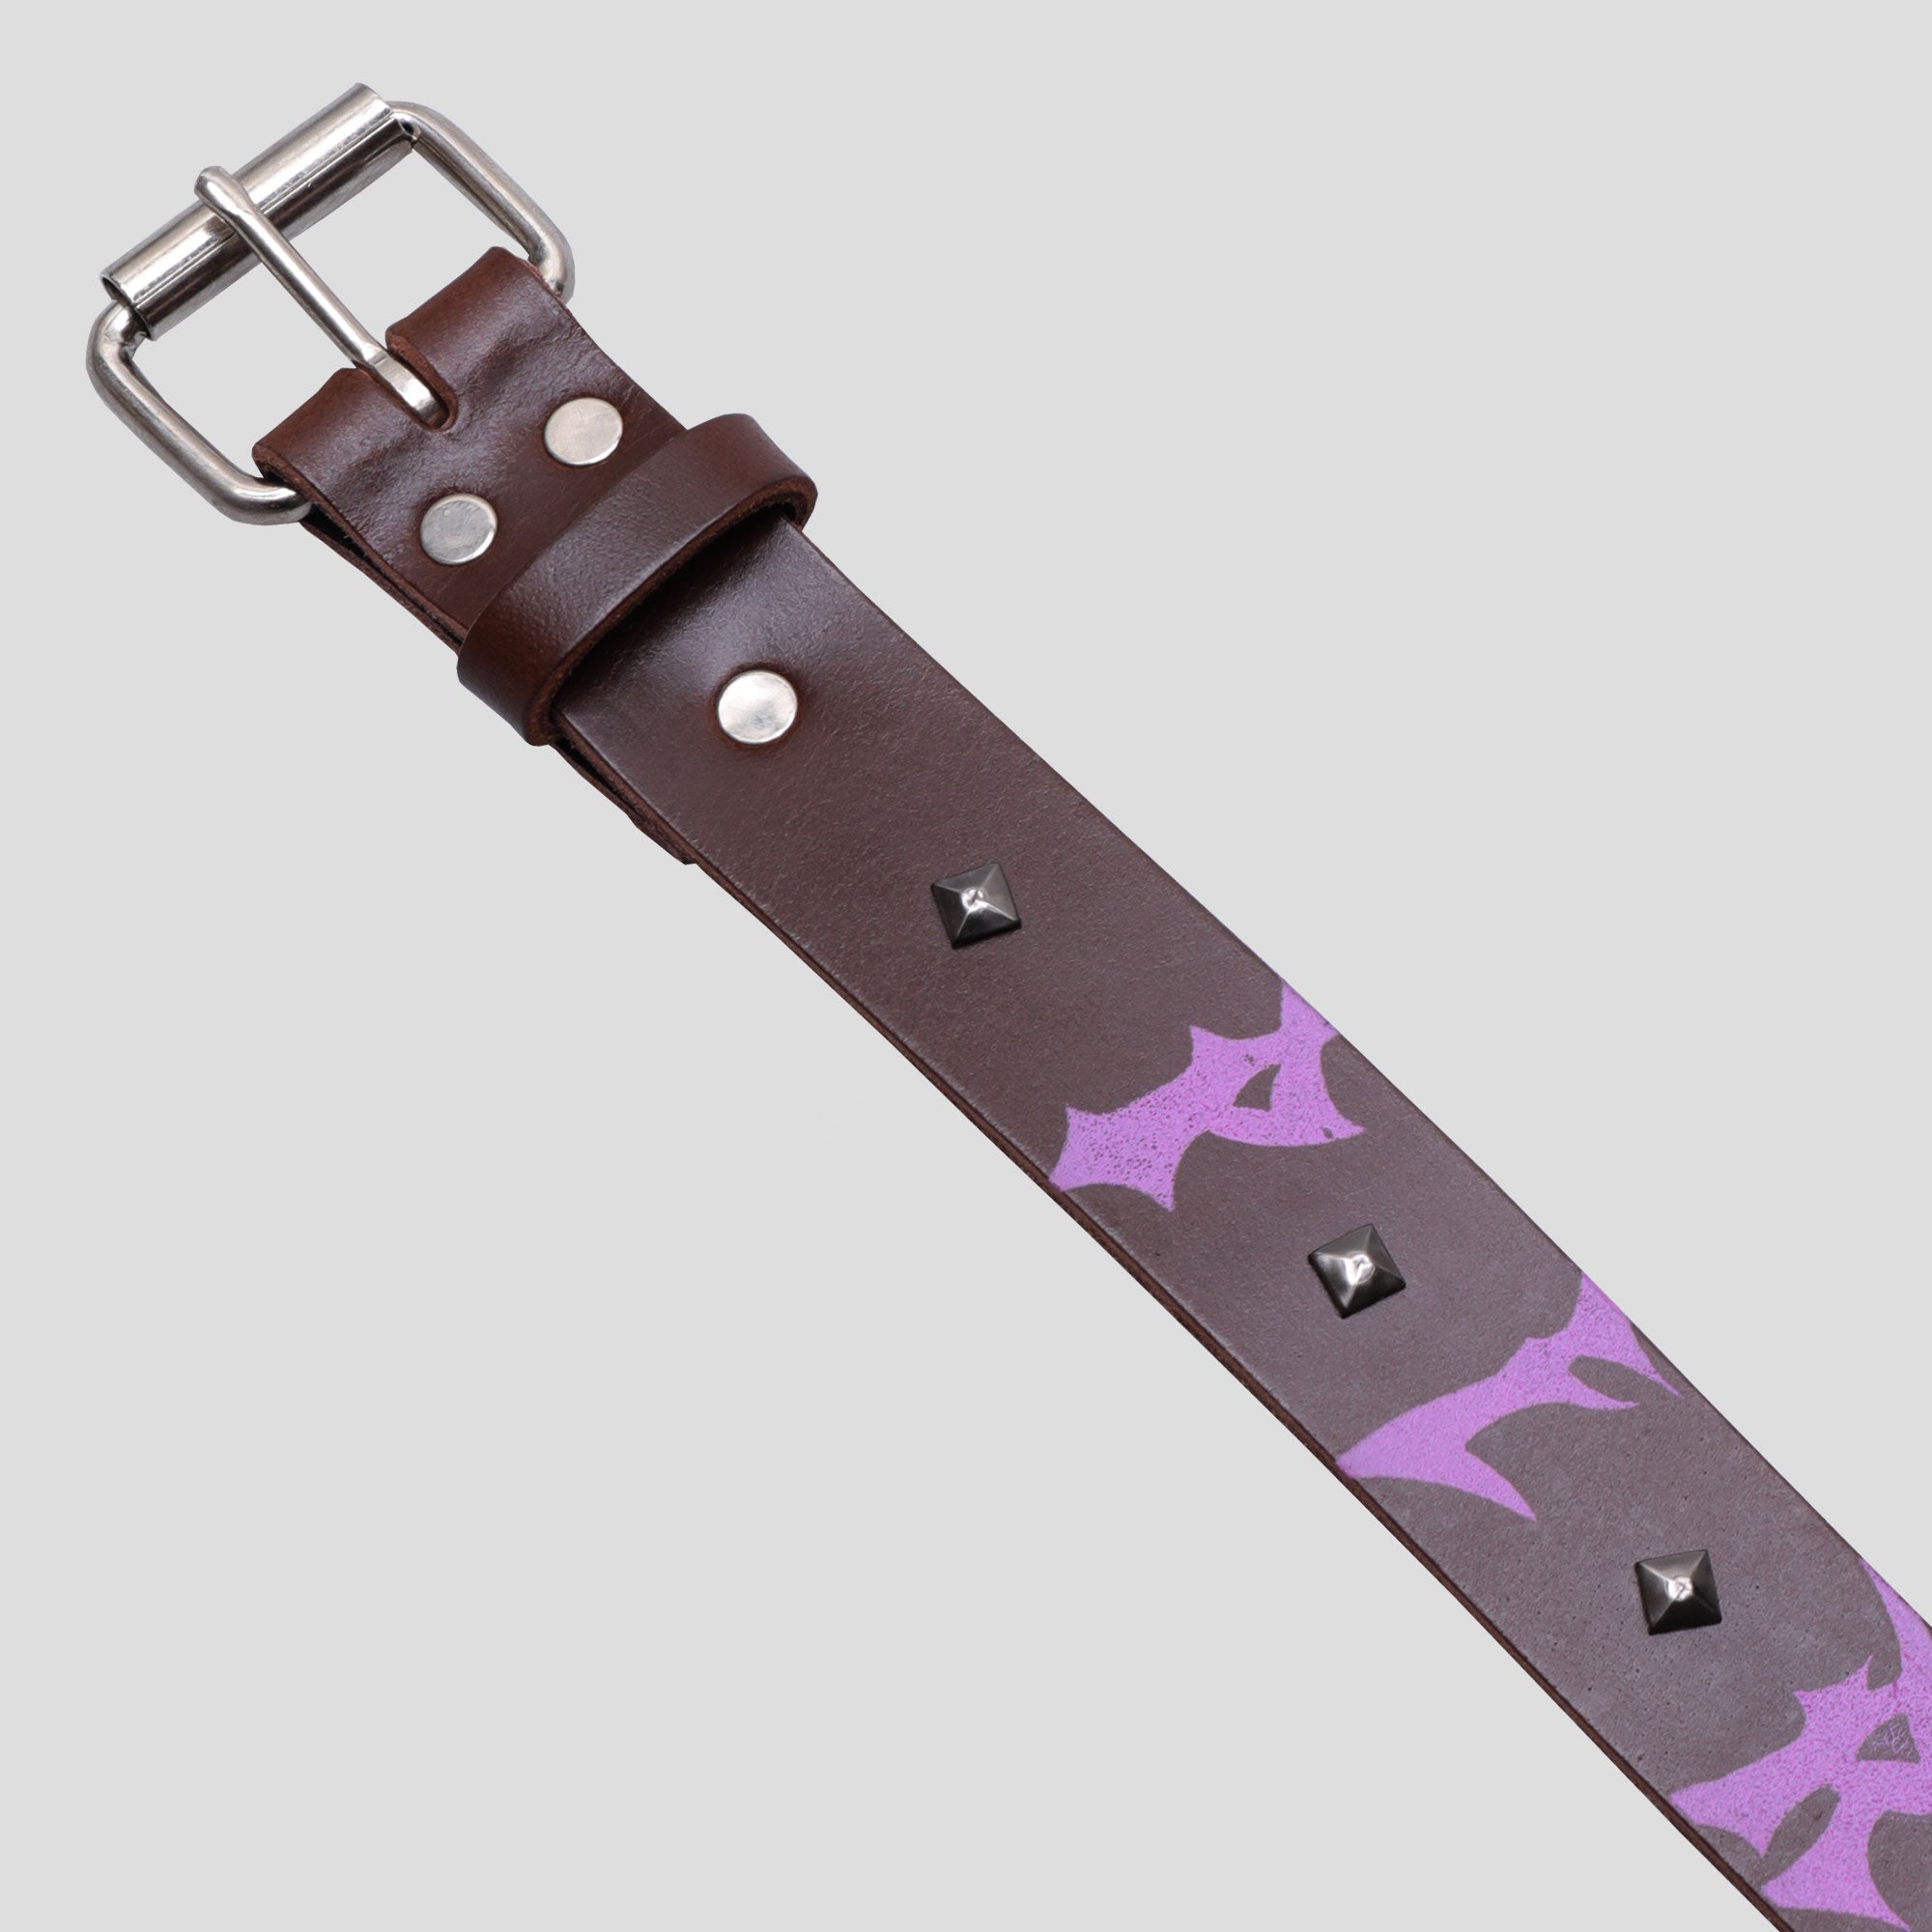 Personal Leather Studded Belt - Brown / Pink / Silver